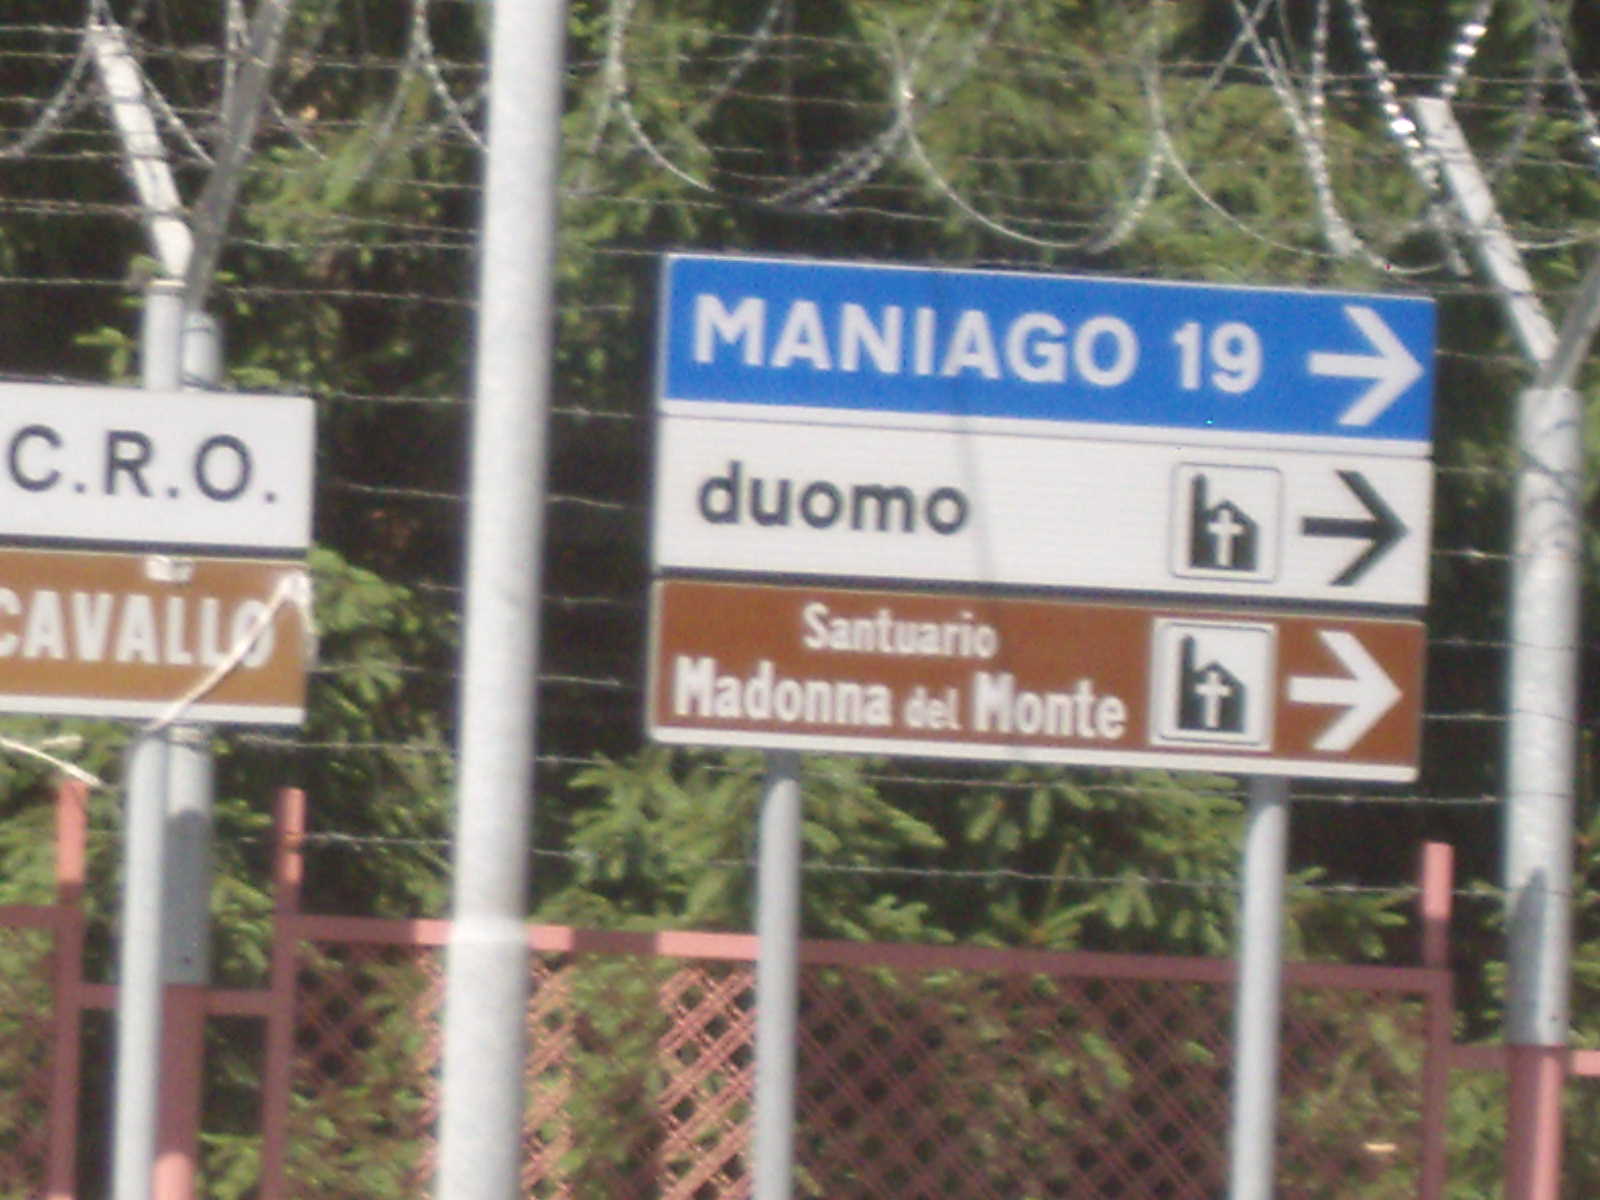 On the road to Maniago!